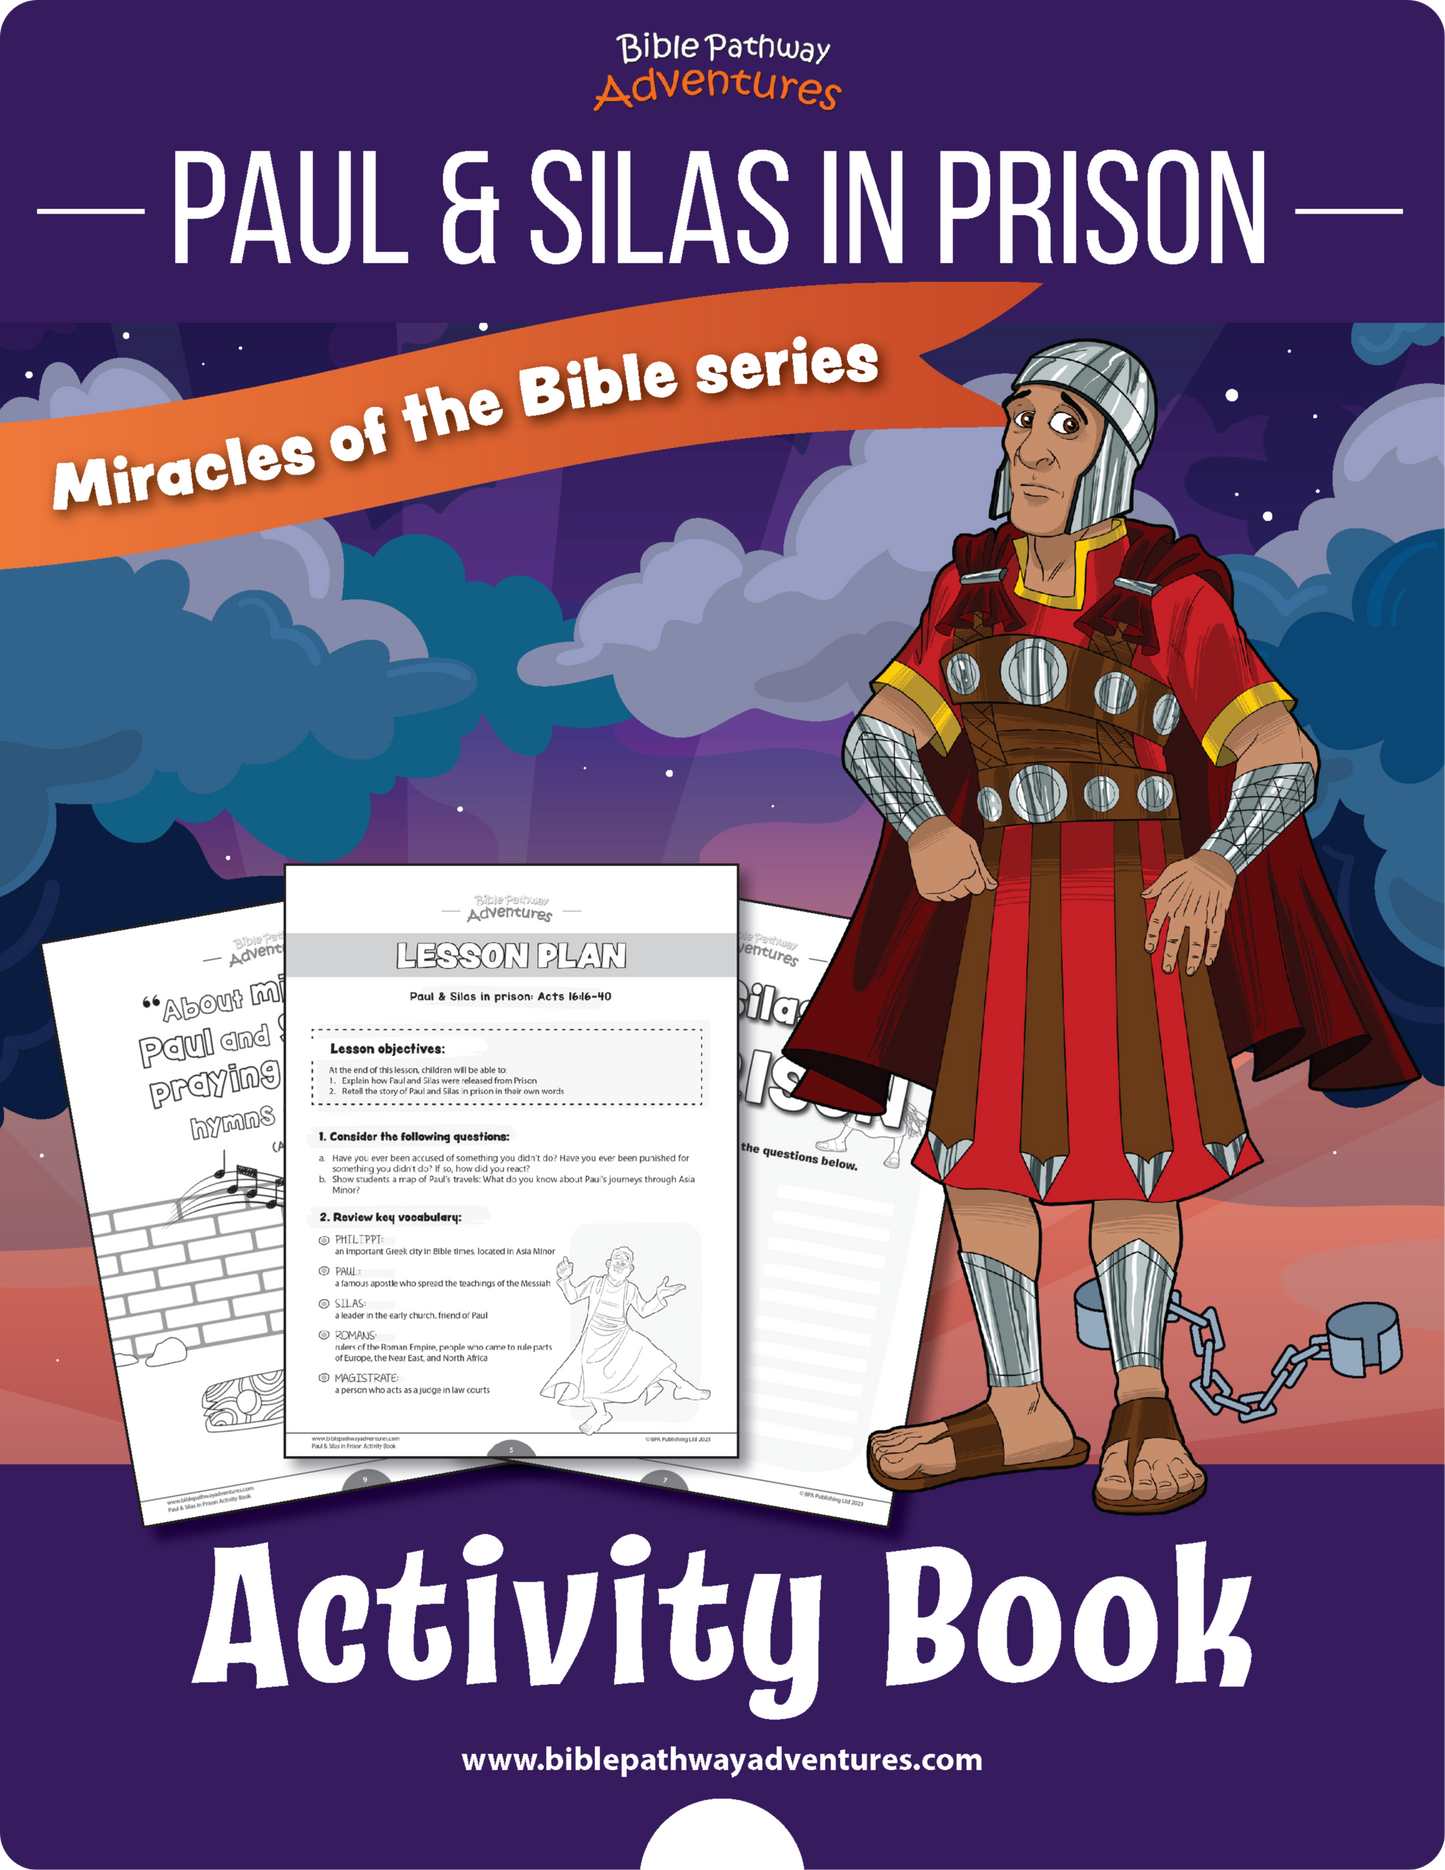 Paul and Silas in Prison Activity Book